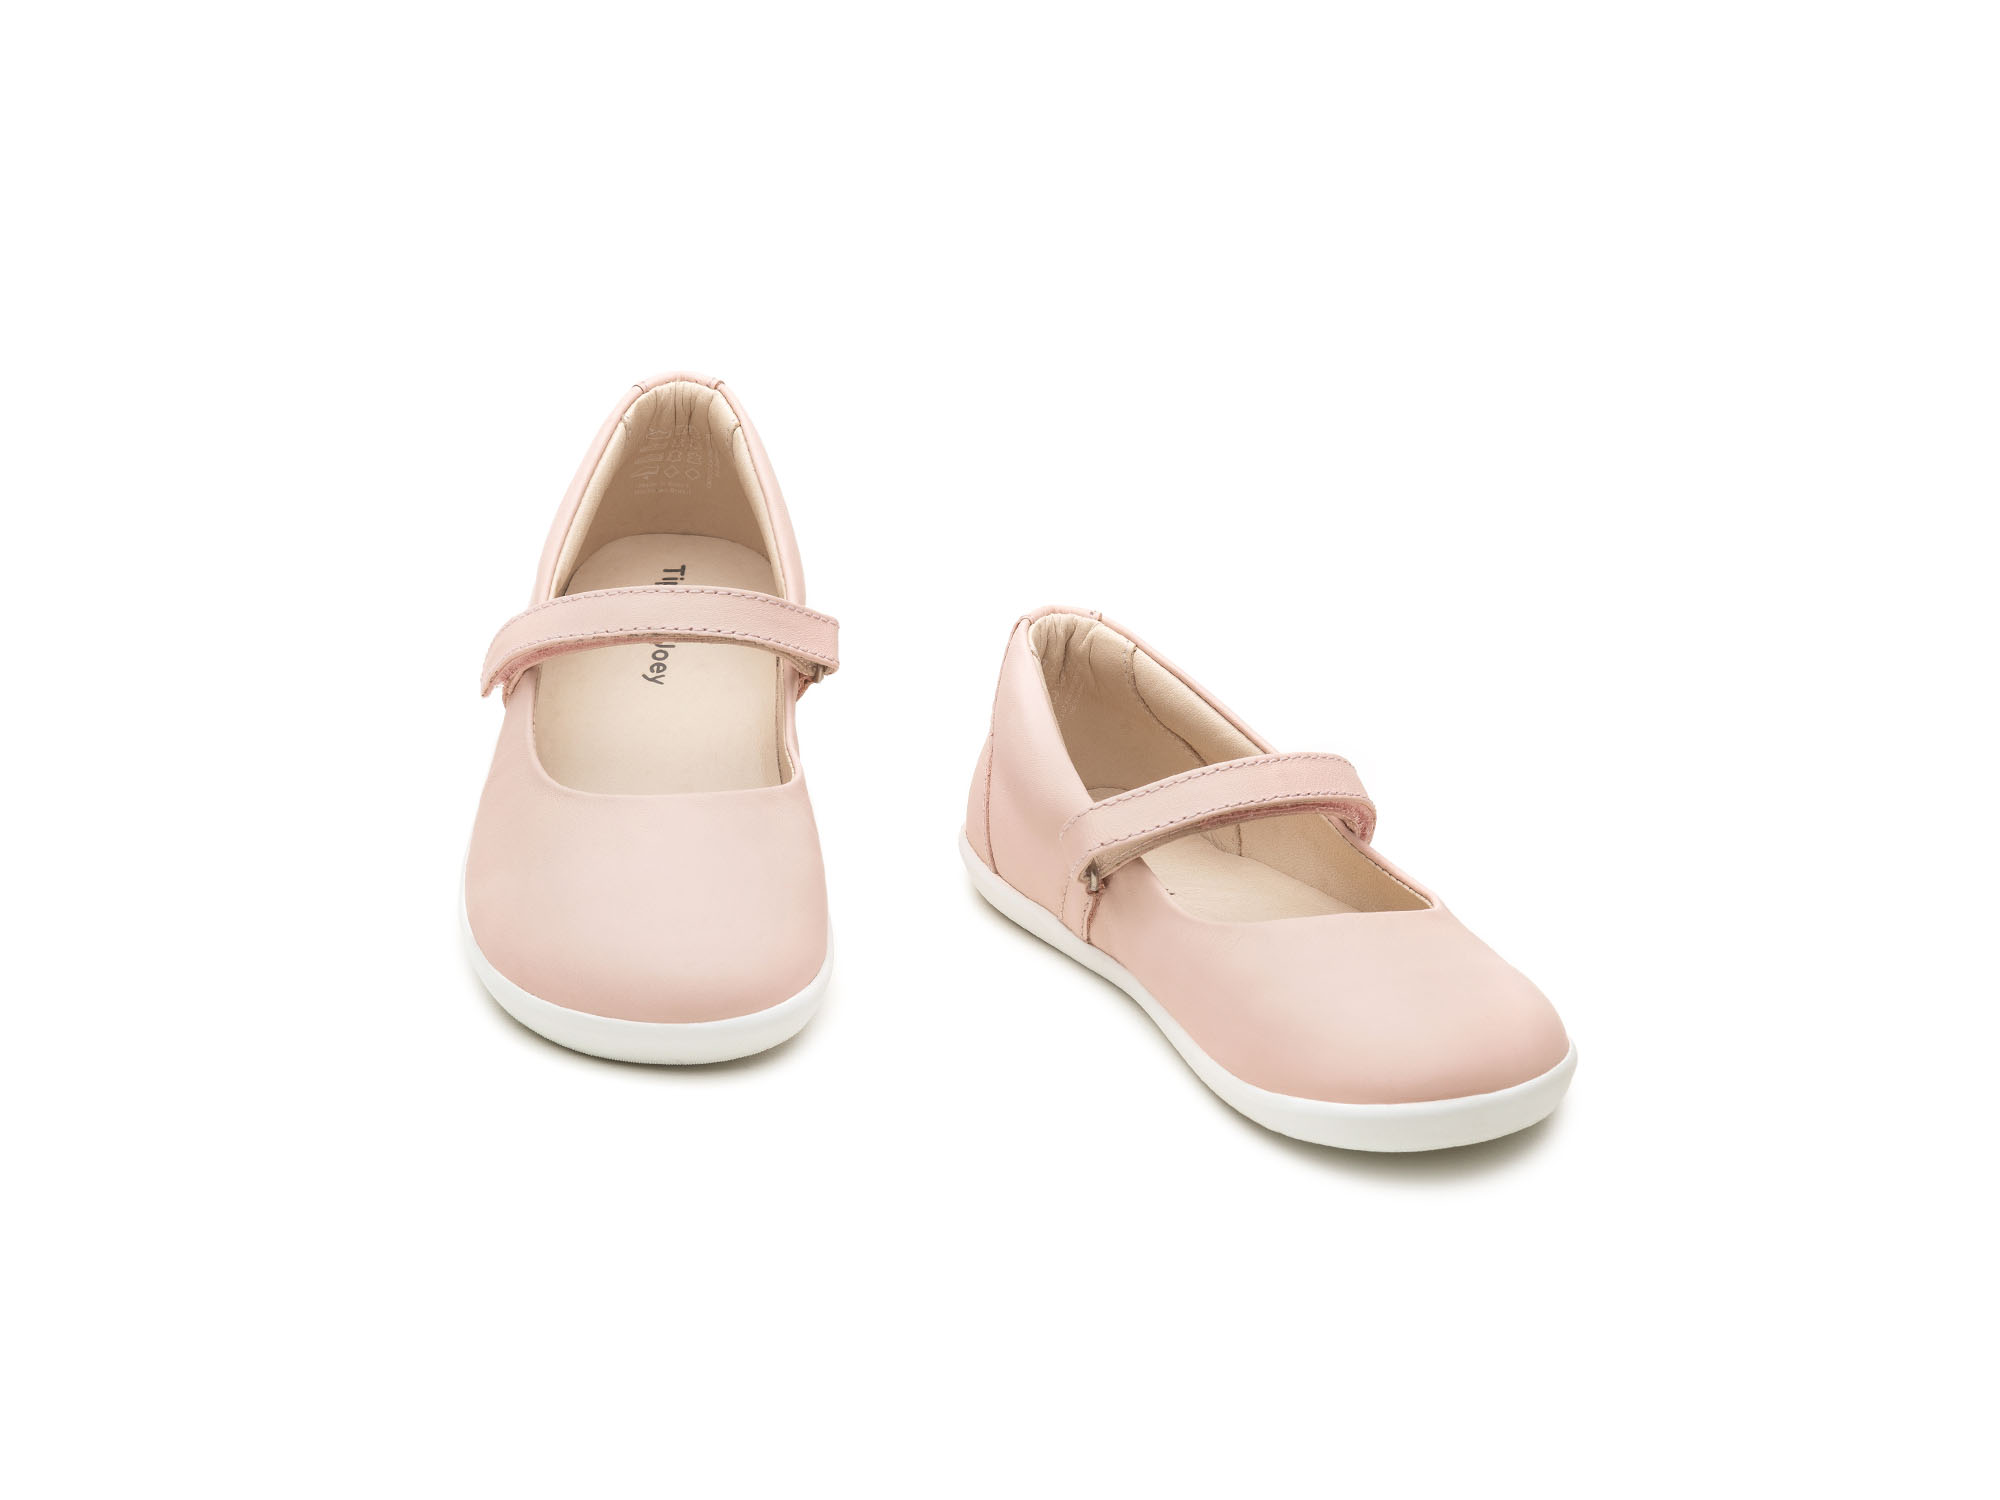 RUN & PLAY Mary Janes for Girls Little Catch | Tip Toey Joey - Australia - 1